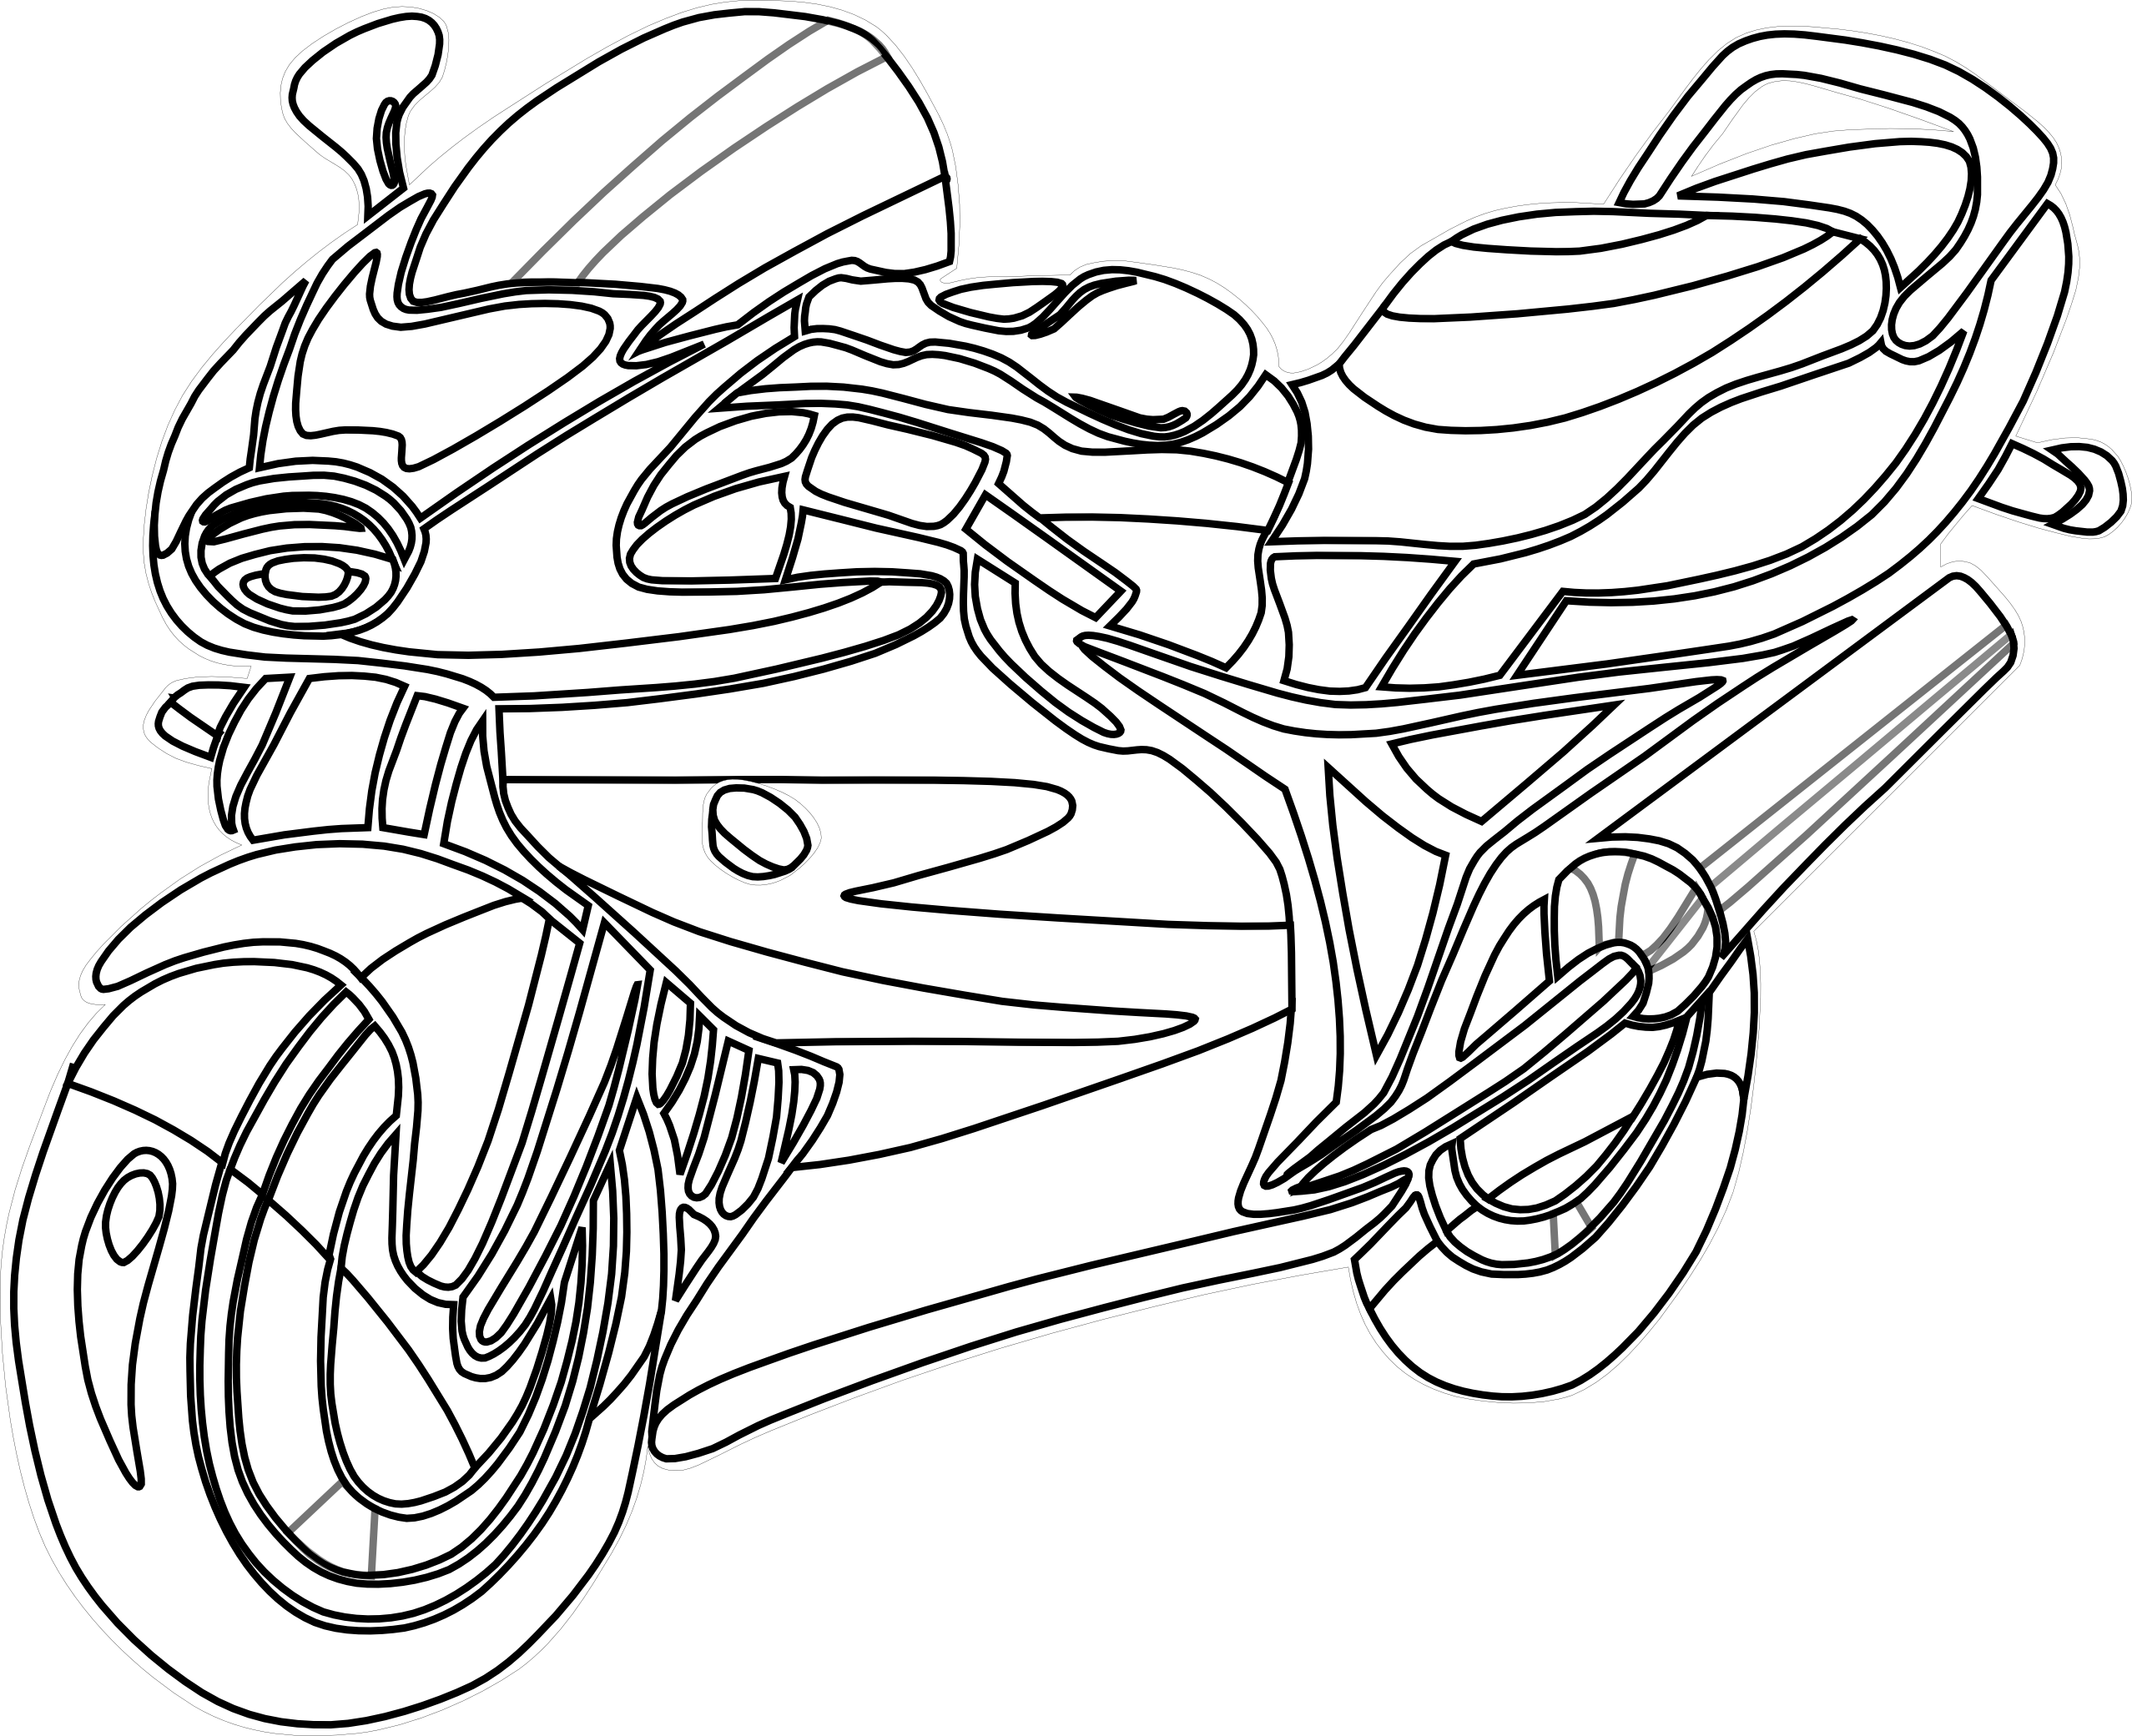 Motorcycle clipart black white clipart